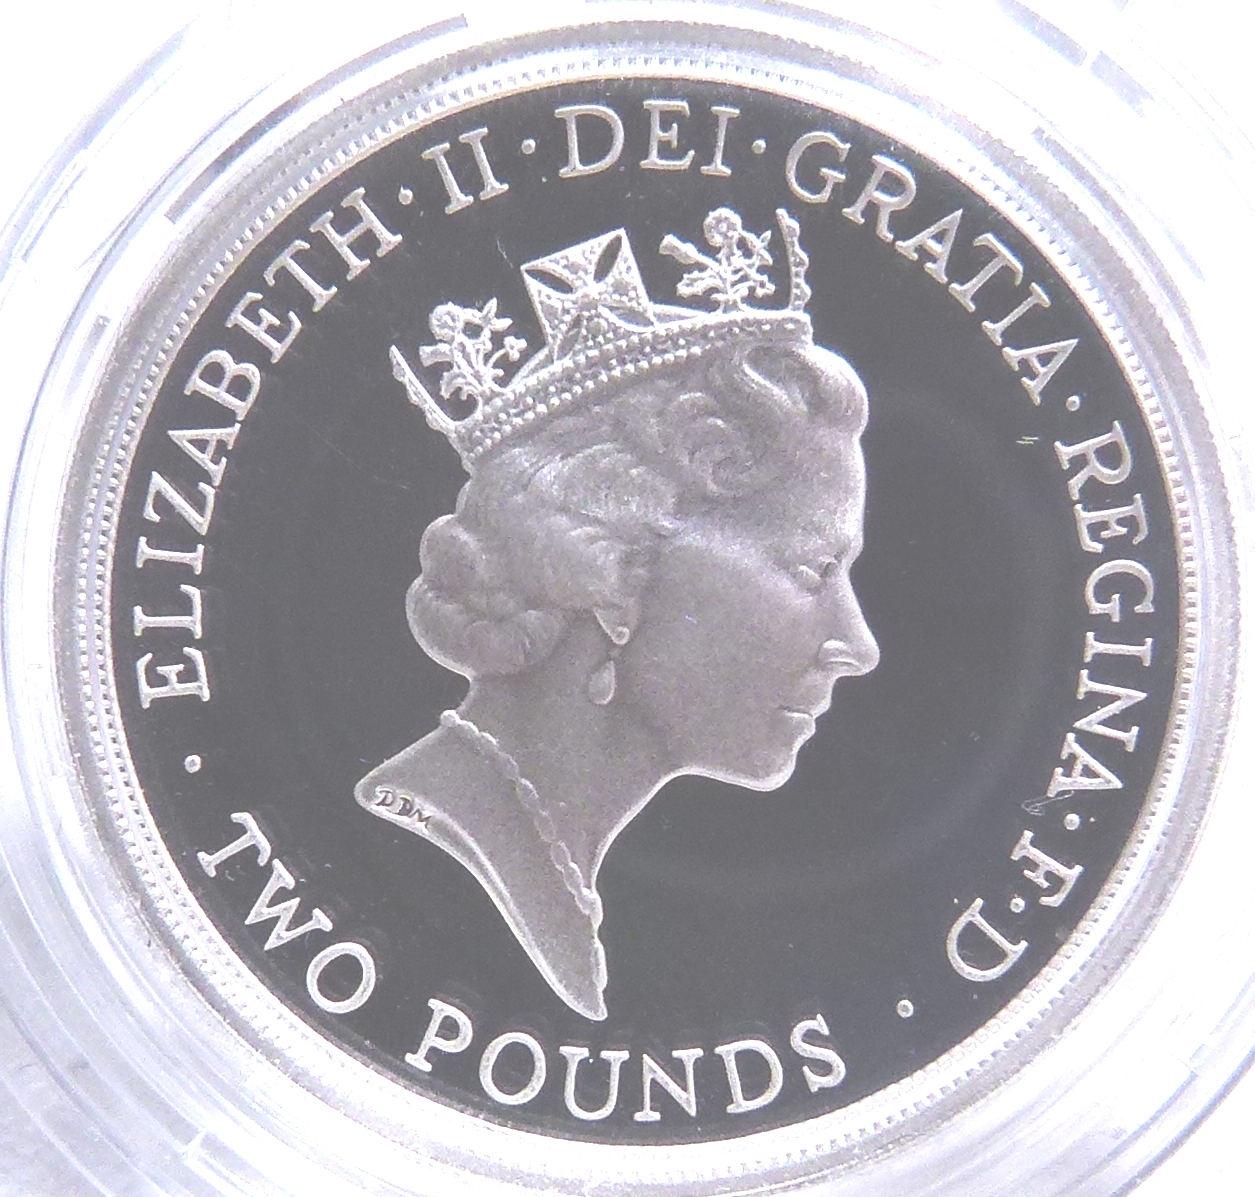 £2 SILVER PROOF COIN. - Image 2 of 2